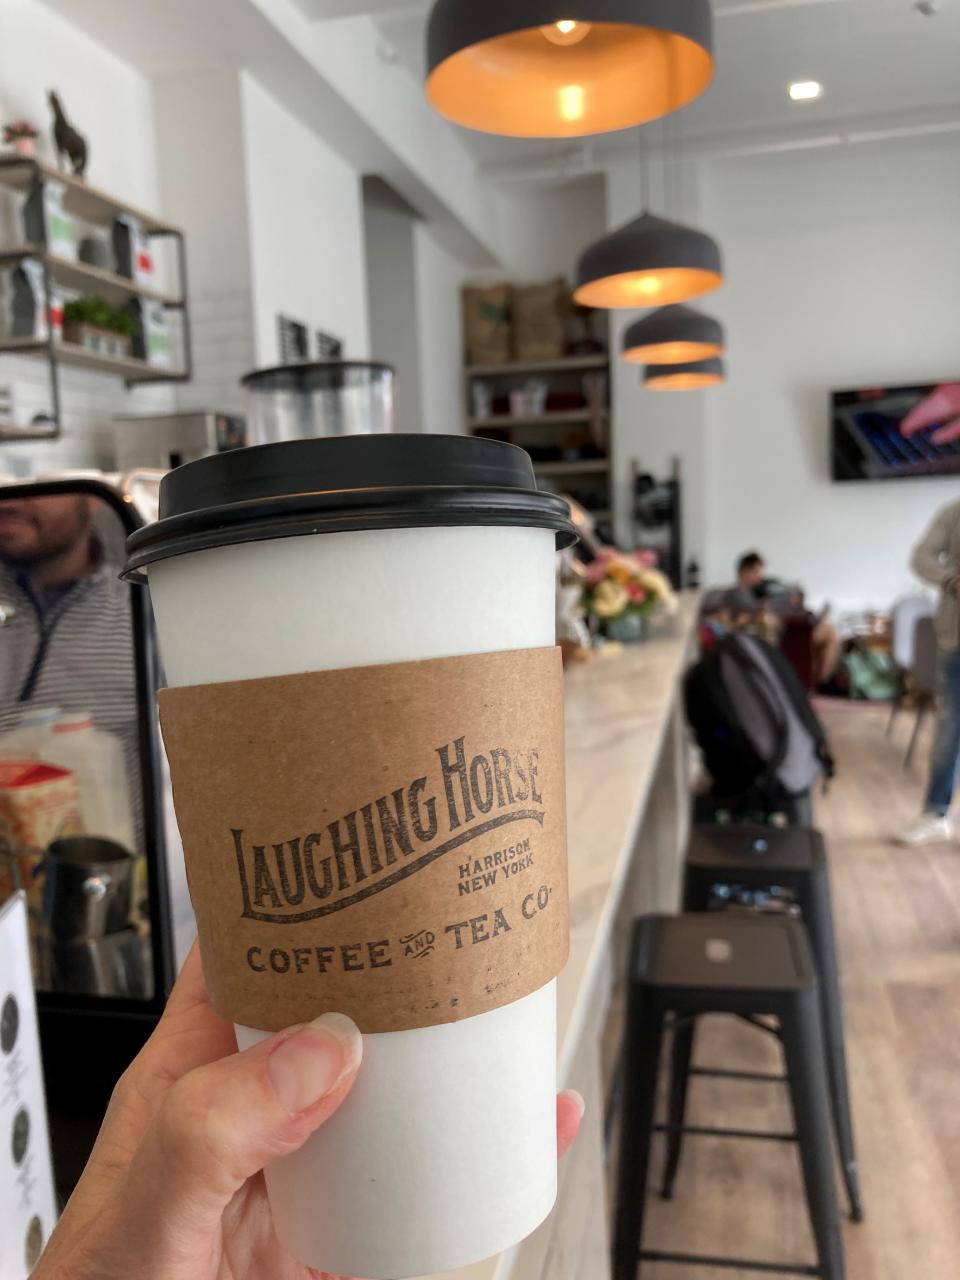 Latte from Laughing Horse Coffee & Tea in Harrison. Photographed May 11, 2022.